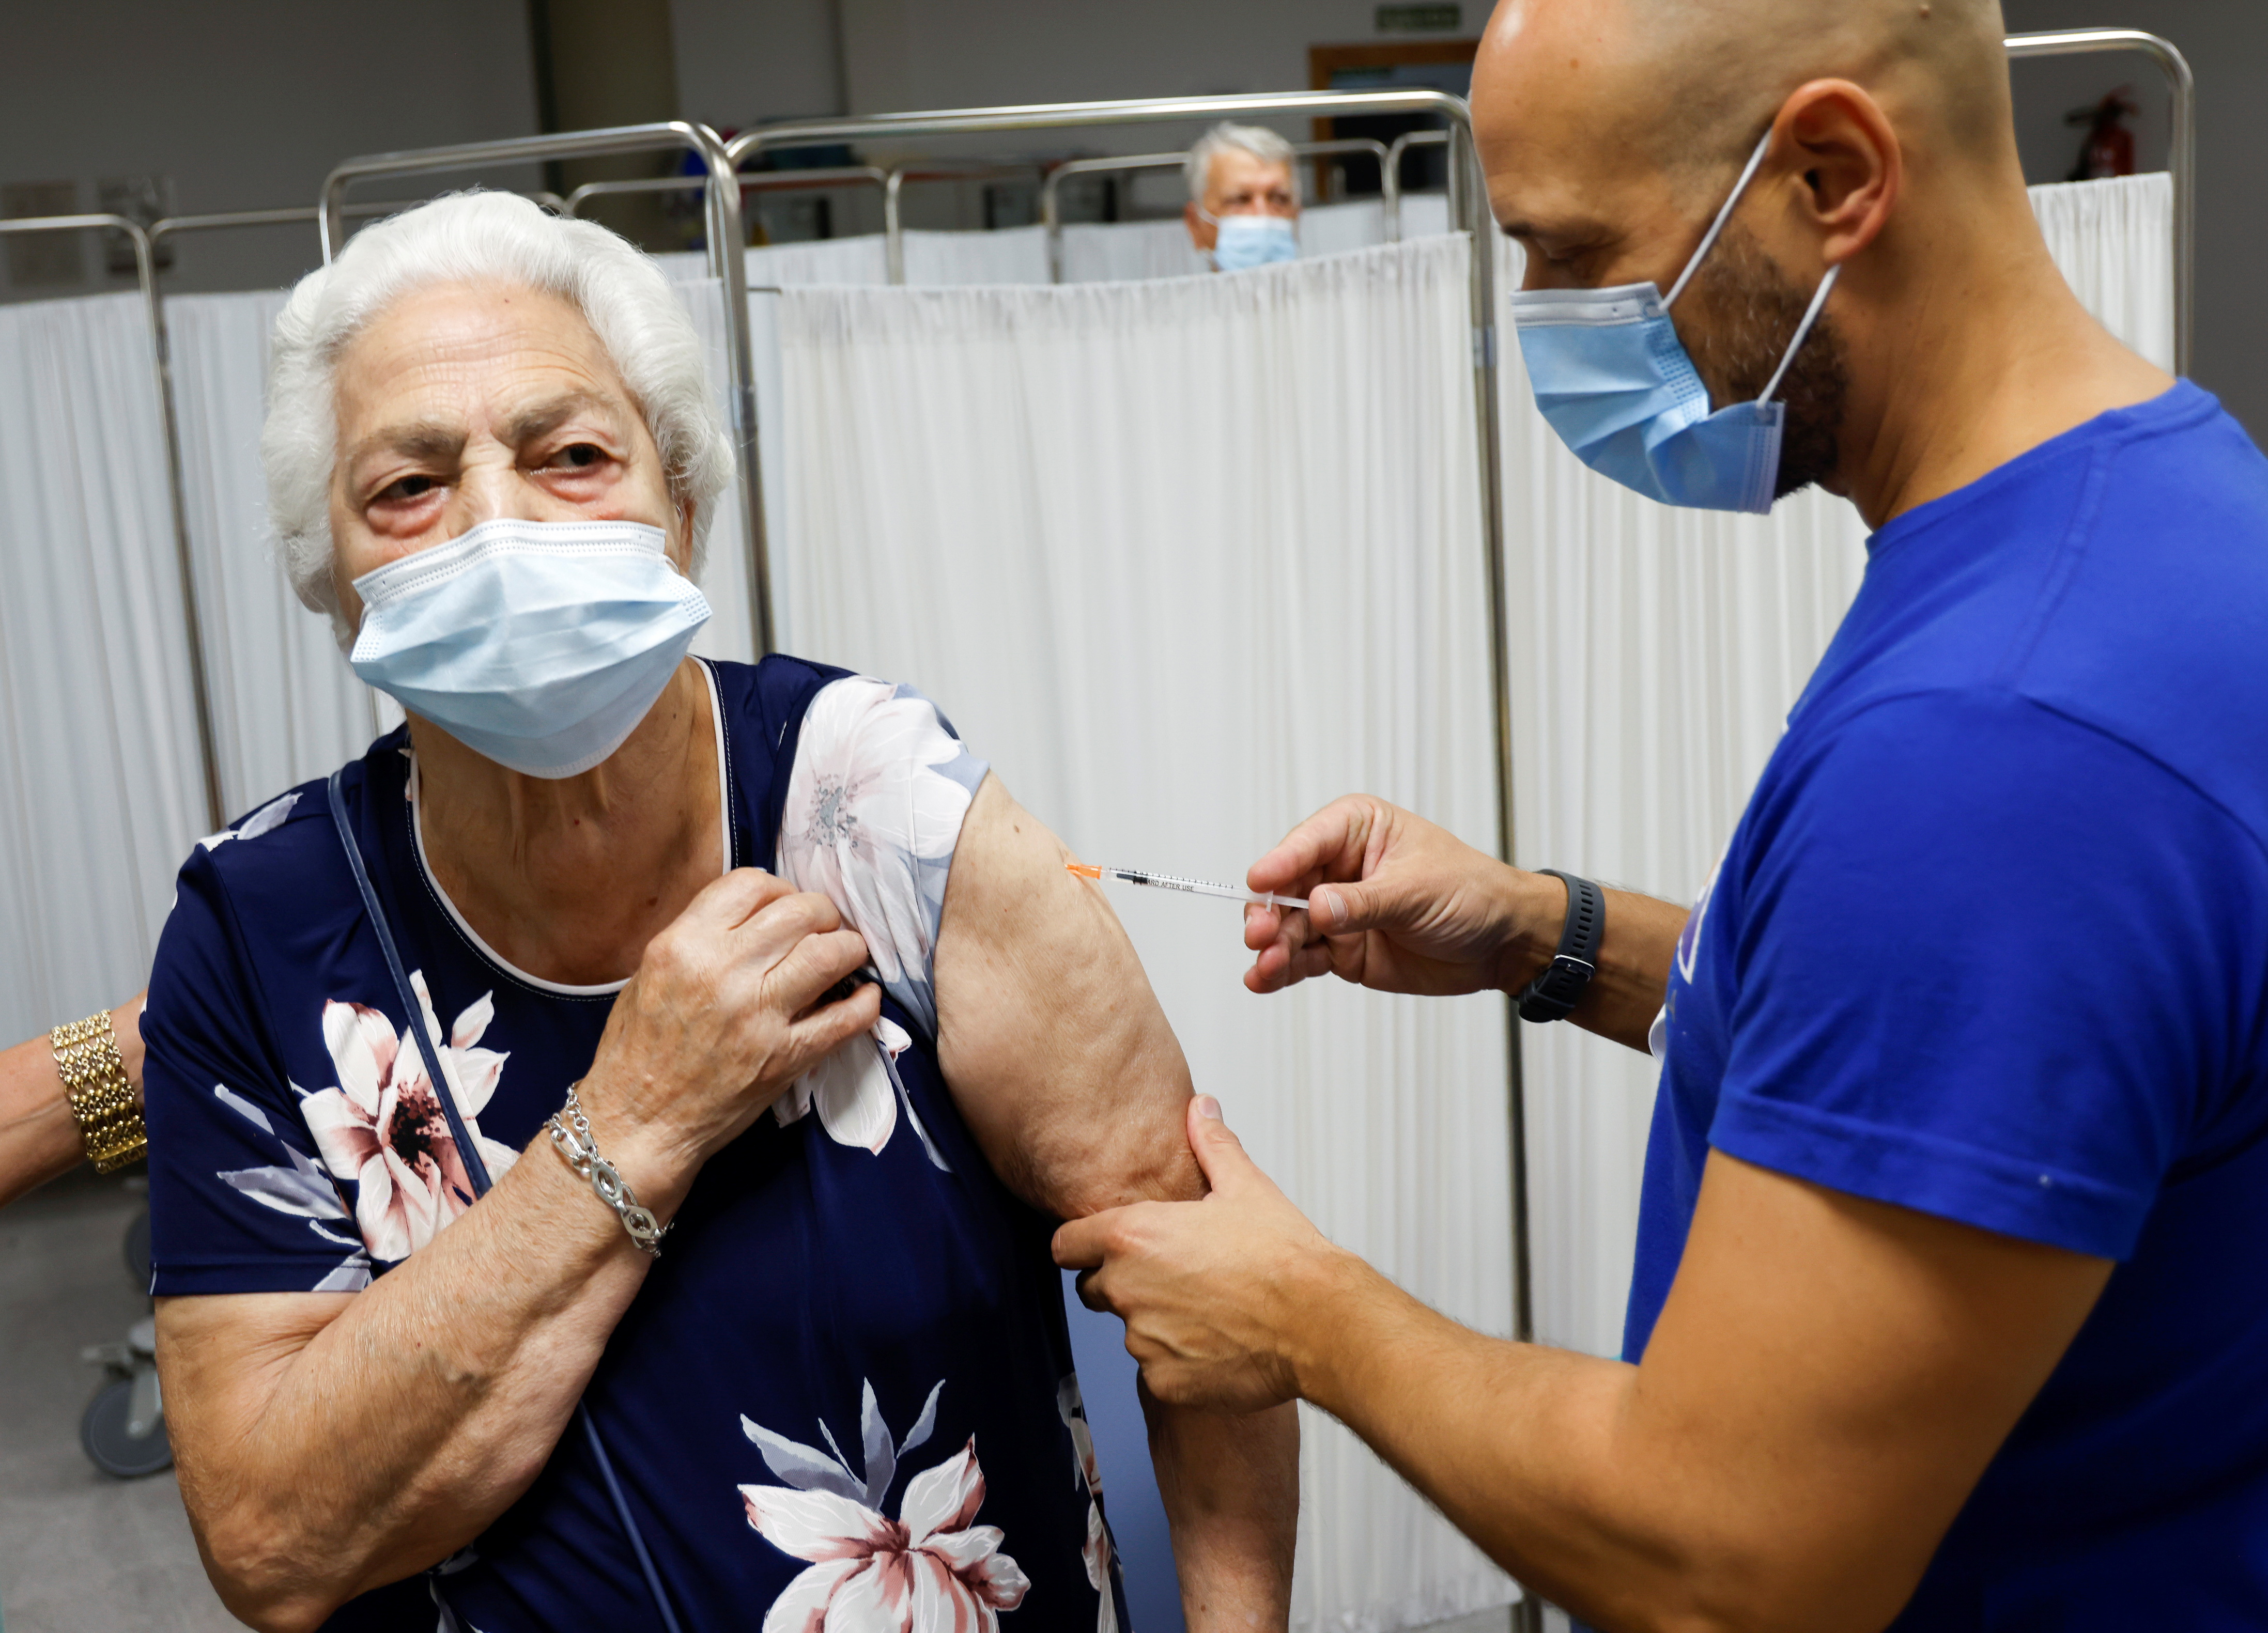 An elderly woman receives a coronavirus disease (COVID-19) vaccine booster coinciding with the flu vaccination campaign in Seville, Spain October 18, 2021. REUTERS/Marcelo del Pozo